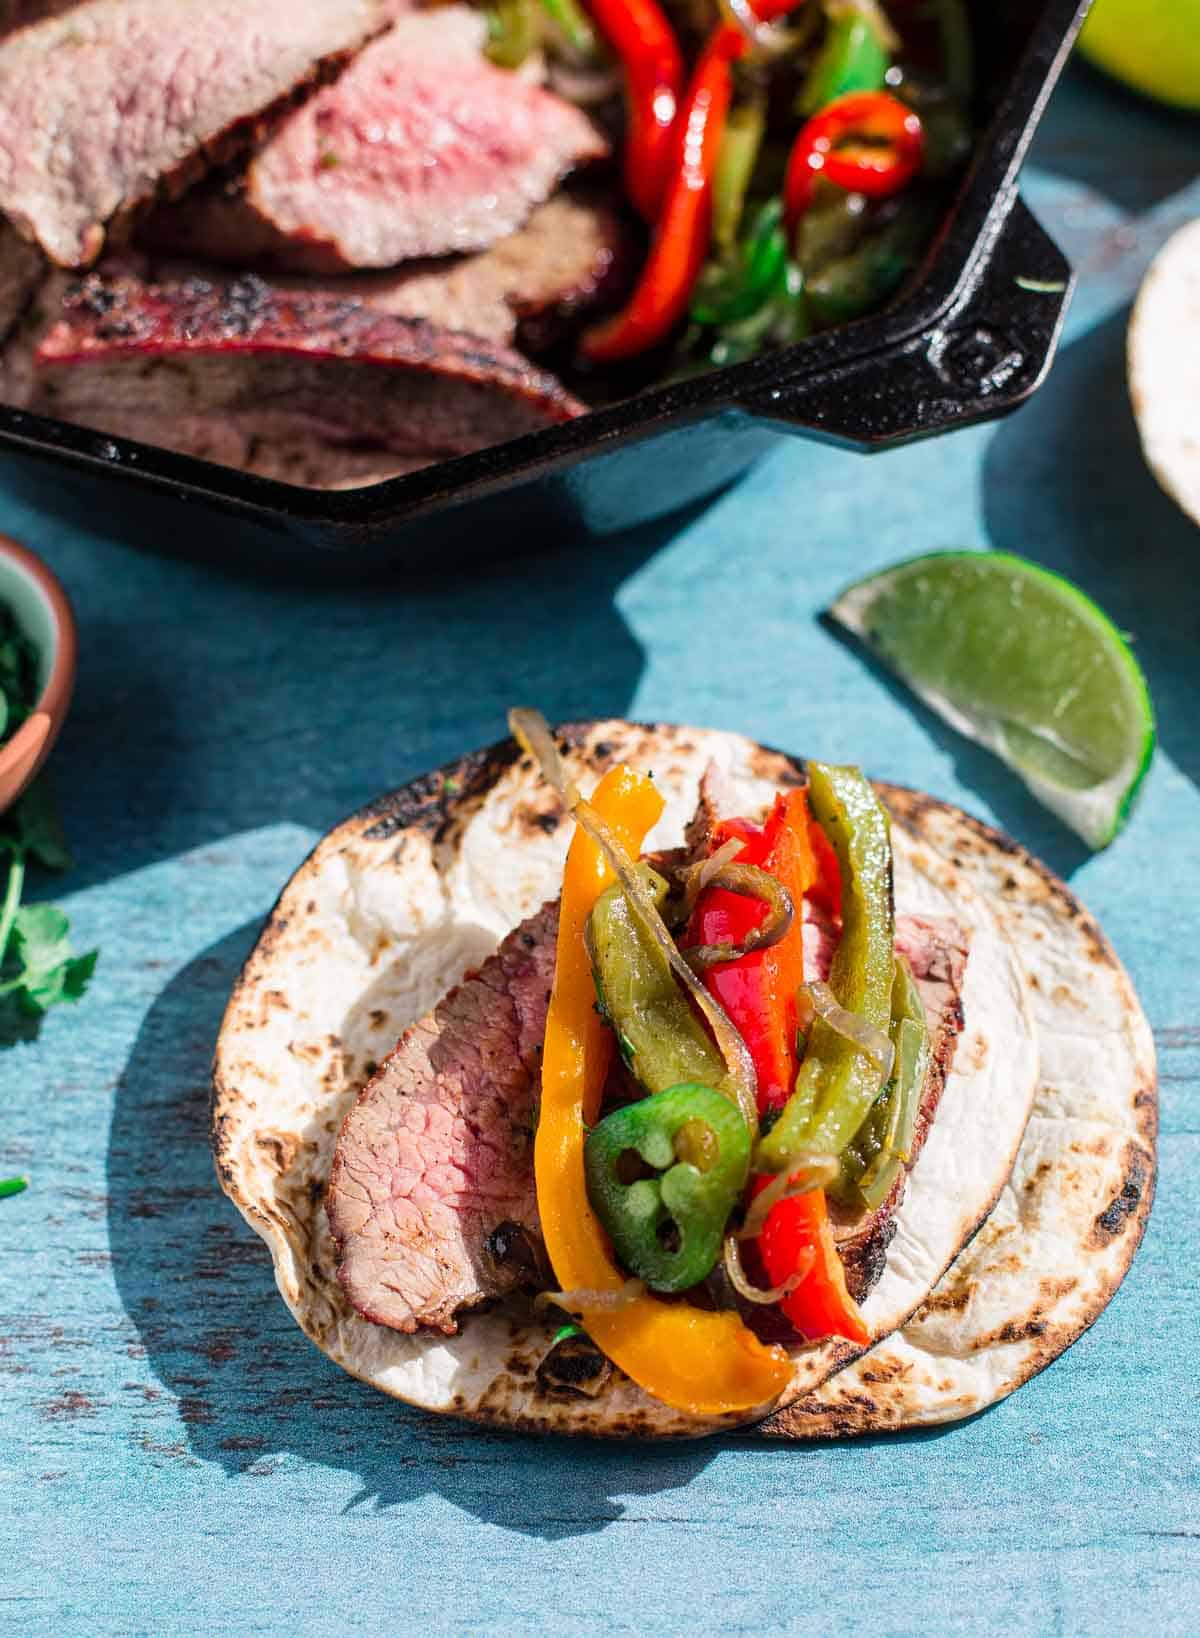 Tri Tip fajitas with sides and toppings on a cutting board.